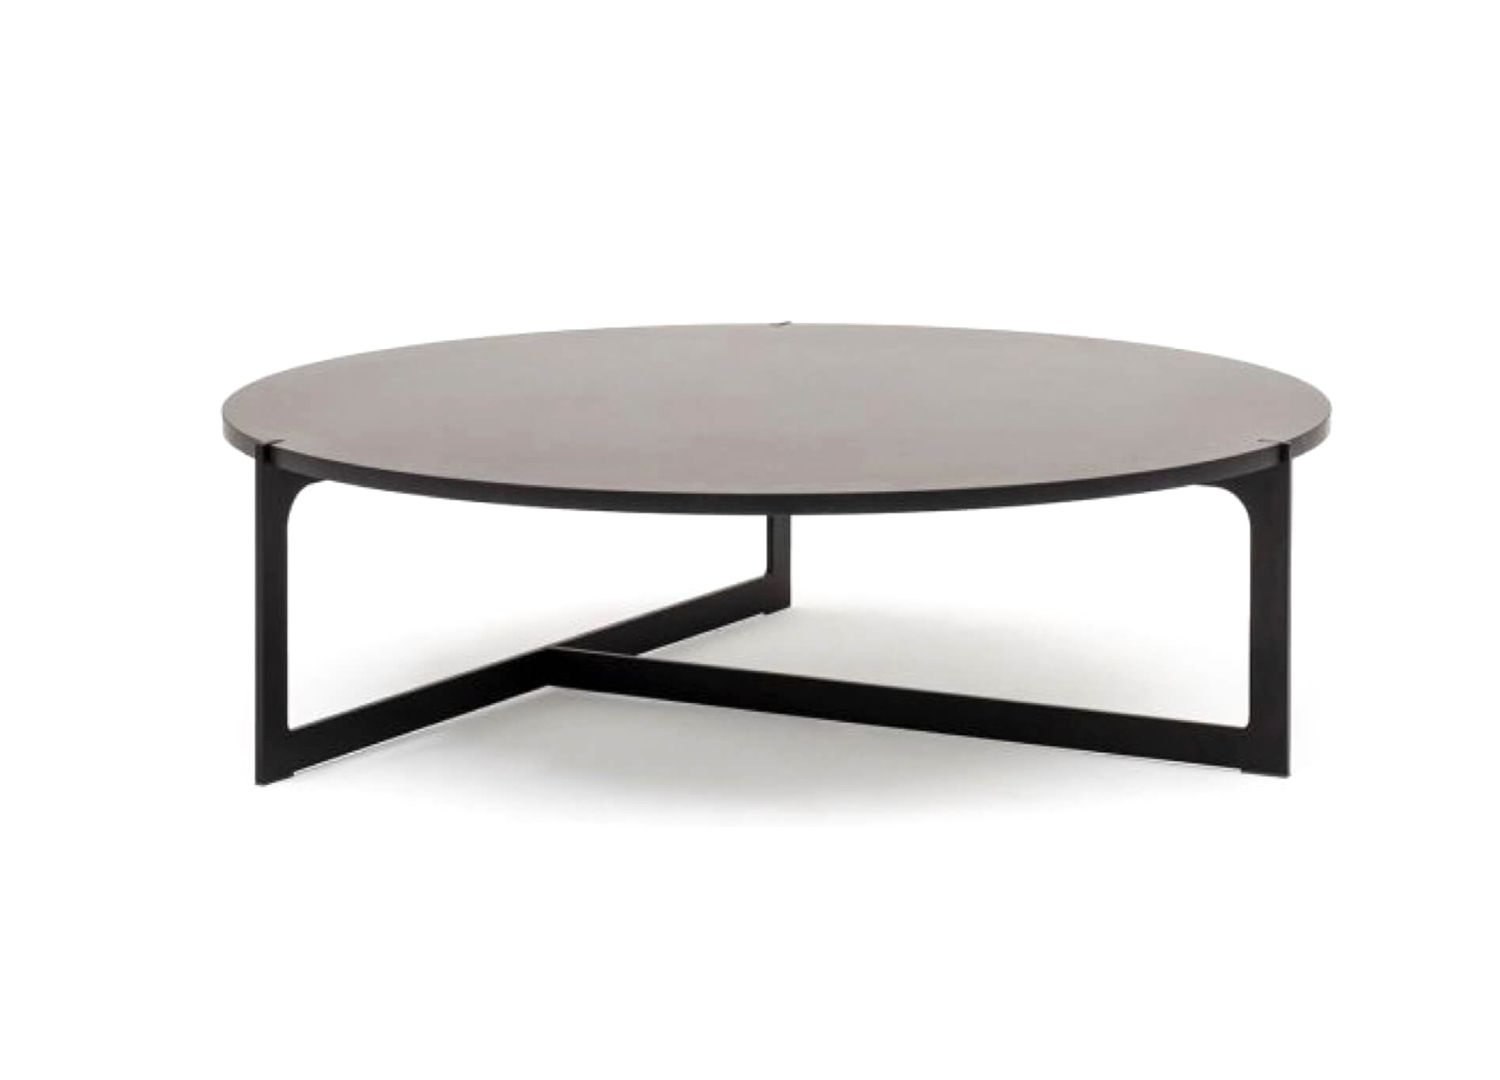 Circular Coffee Tables | Nine To Know | Style | Est Living Regarding Circular Coffee Tables (View 10 of 20)